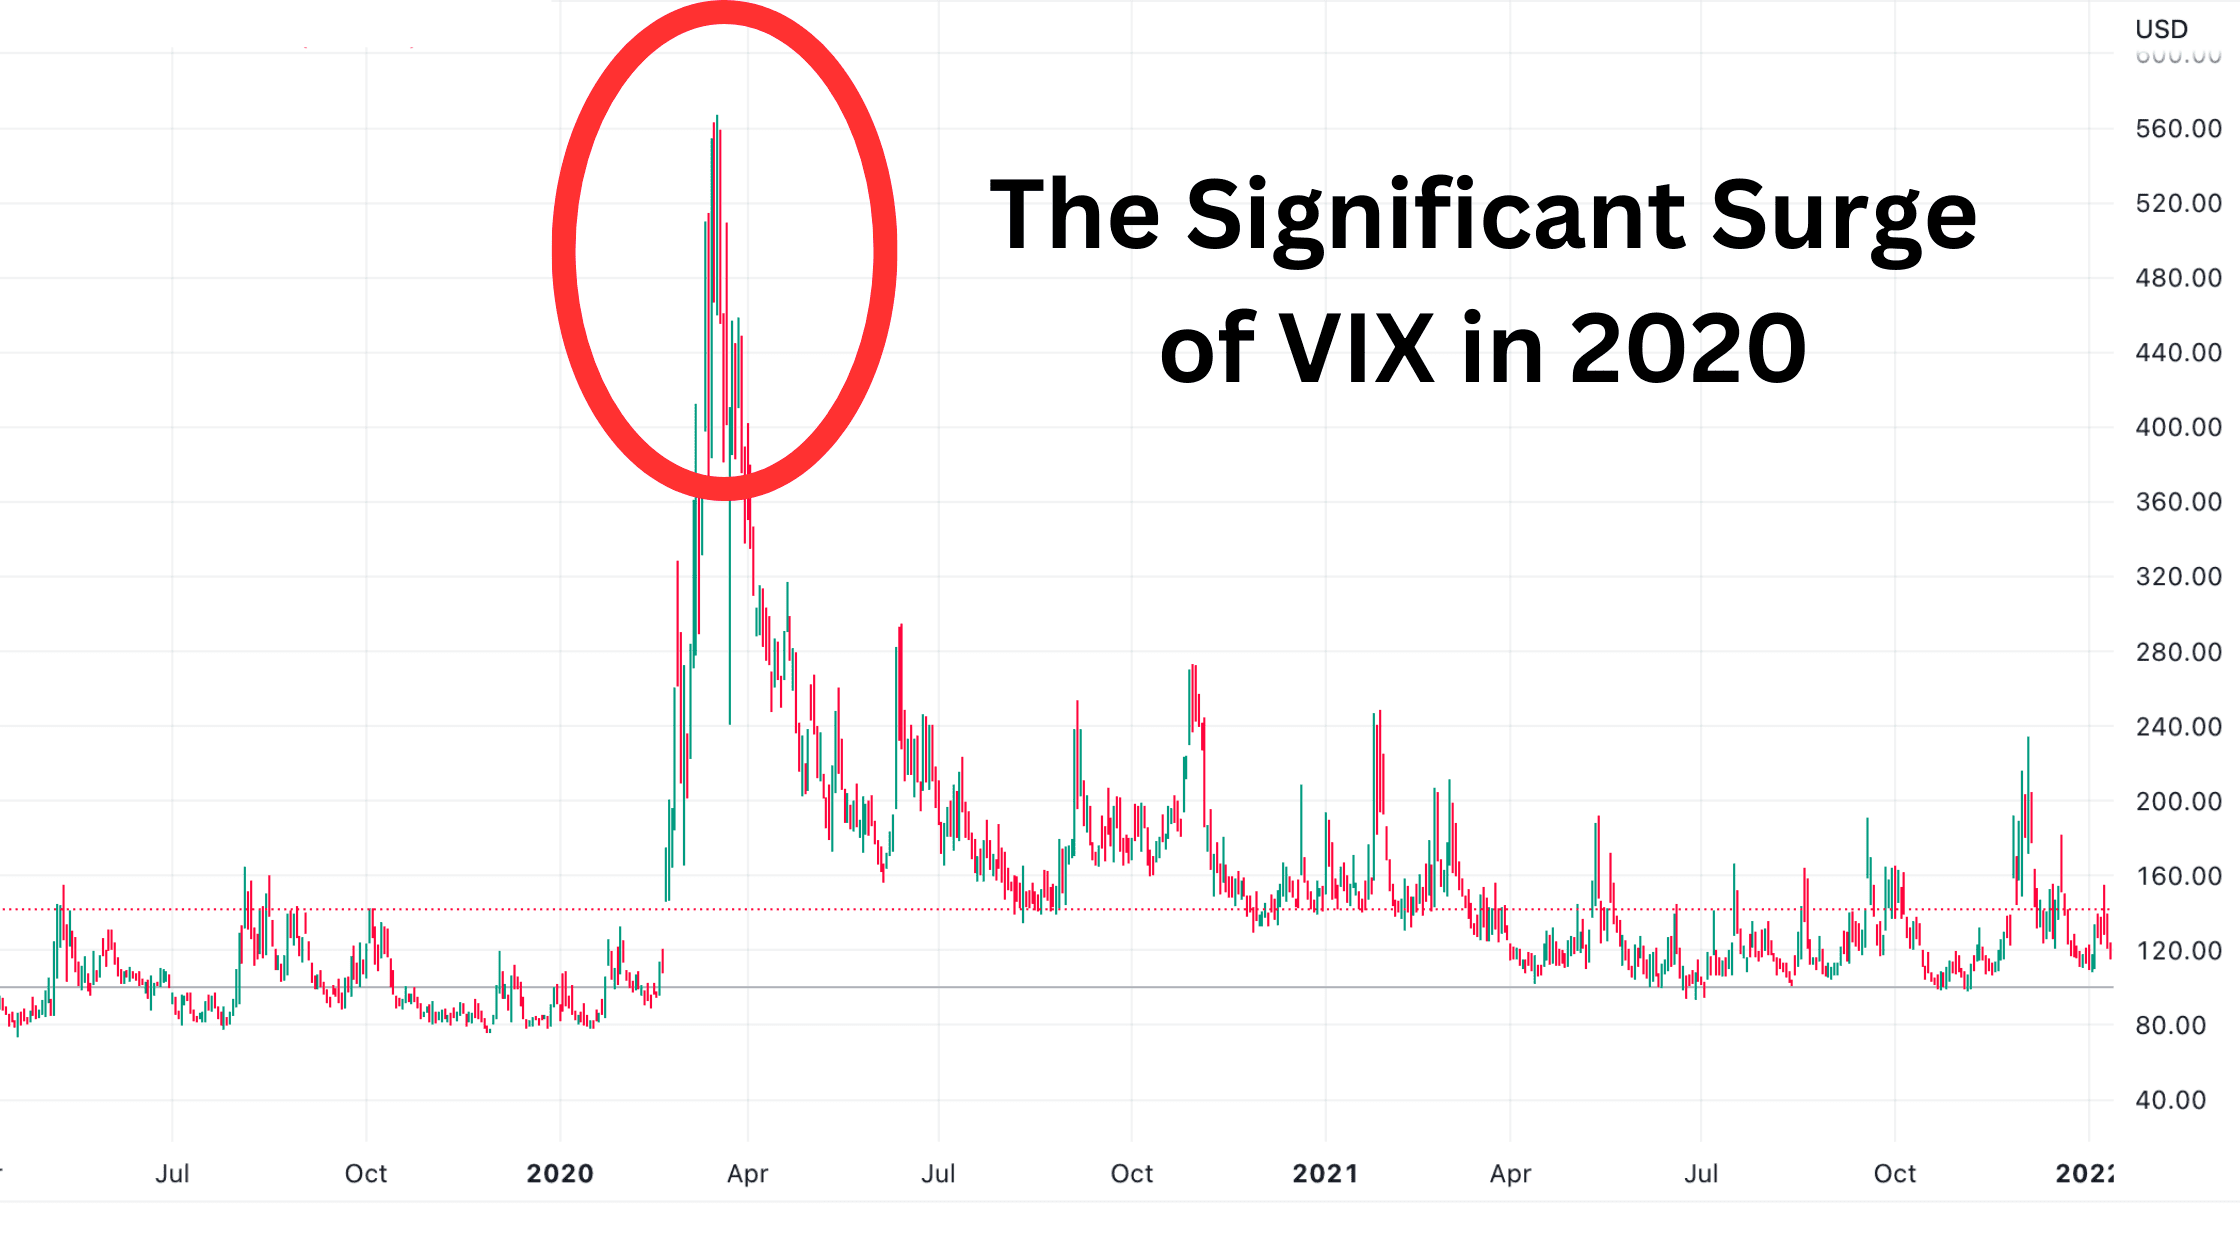 The Significant Surge of VIX in 2020